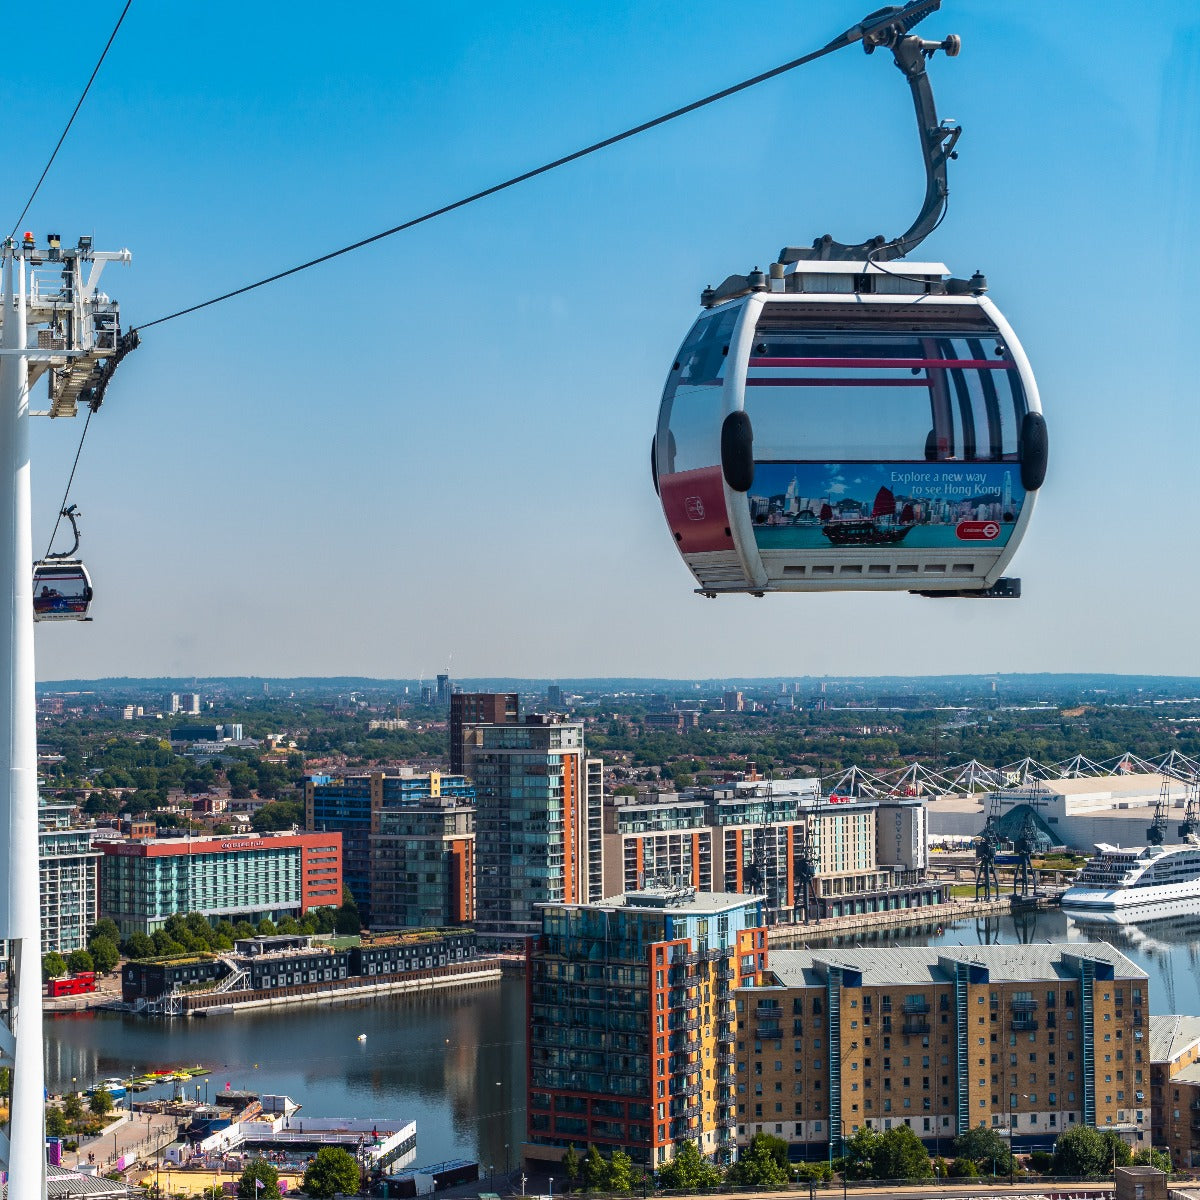 The Emirates cable car over London